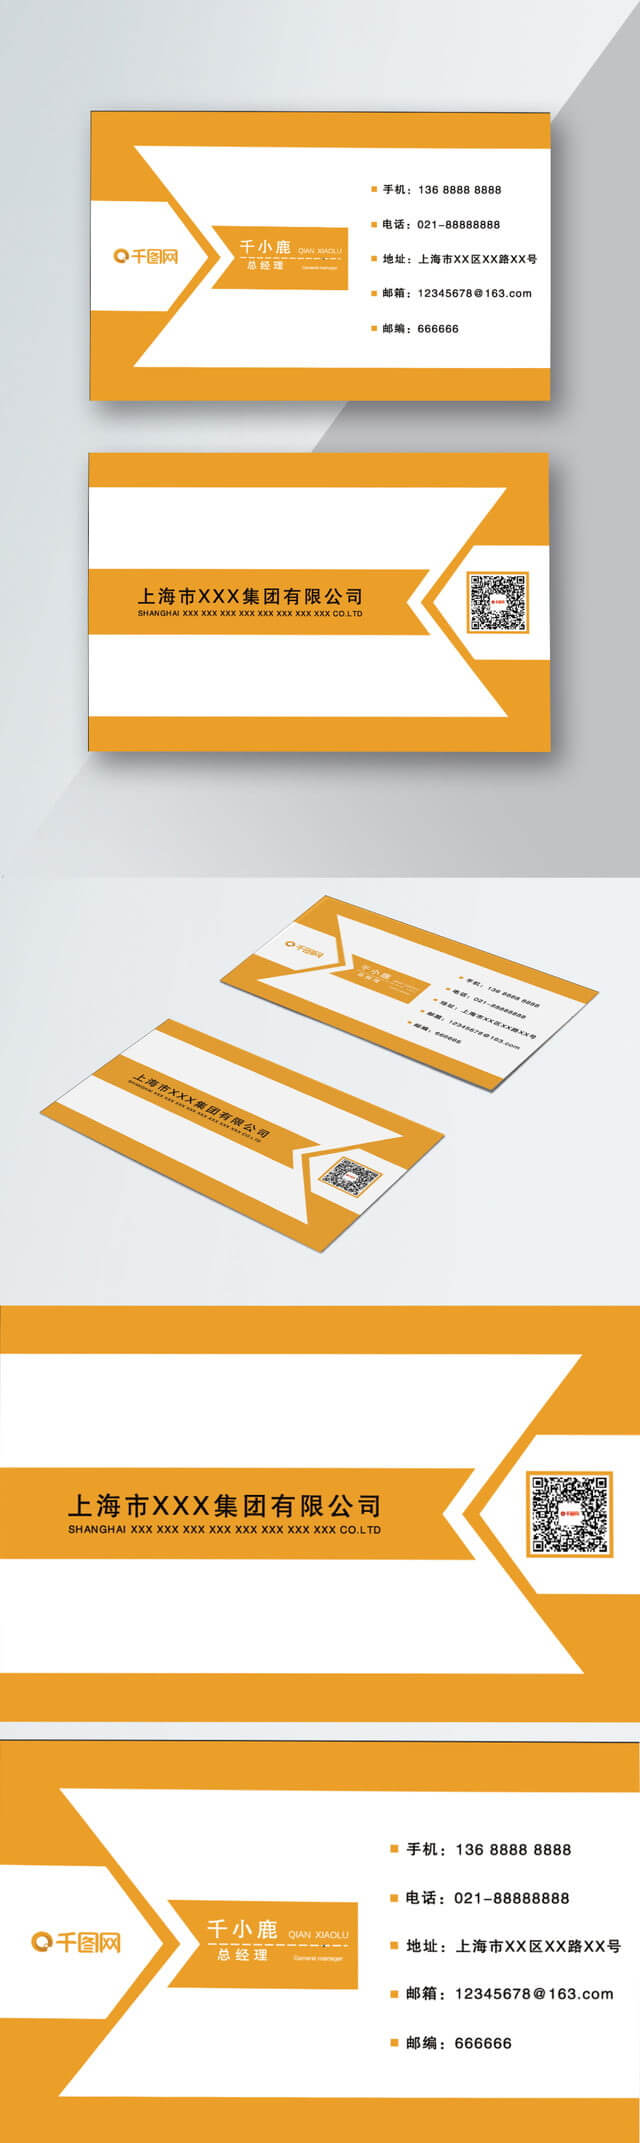 Auto Insurance Business Card Vector Material Auto Insurance Throughout Car Insurance Card Template Download